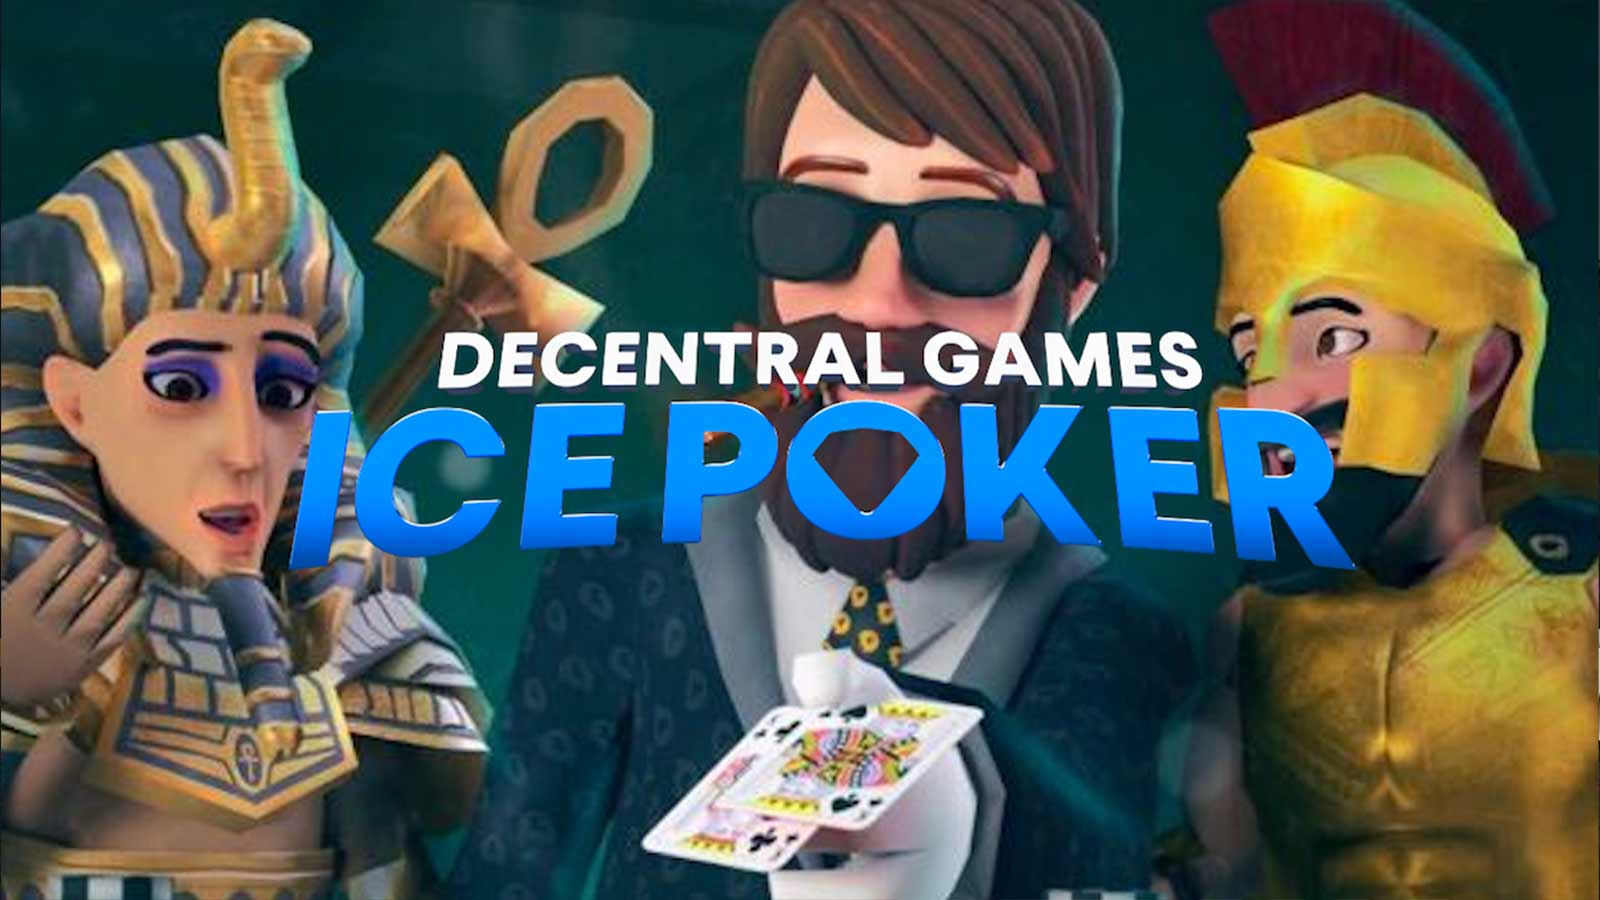 ICE Poker is the Secret behind Decentral Games